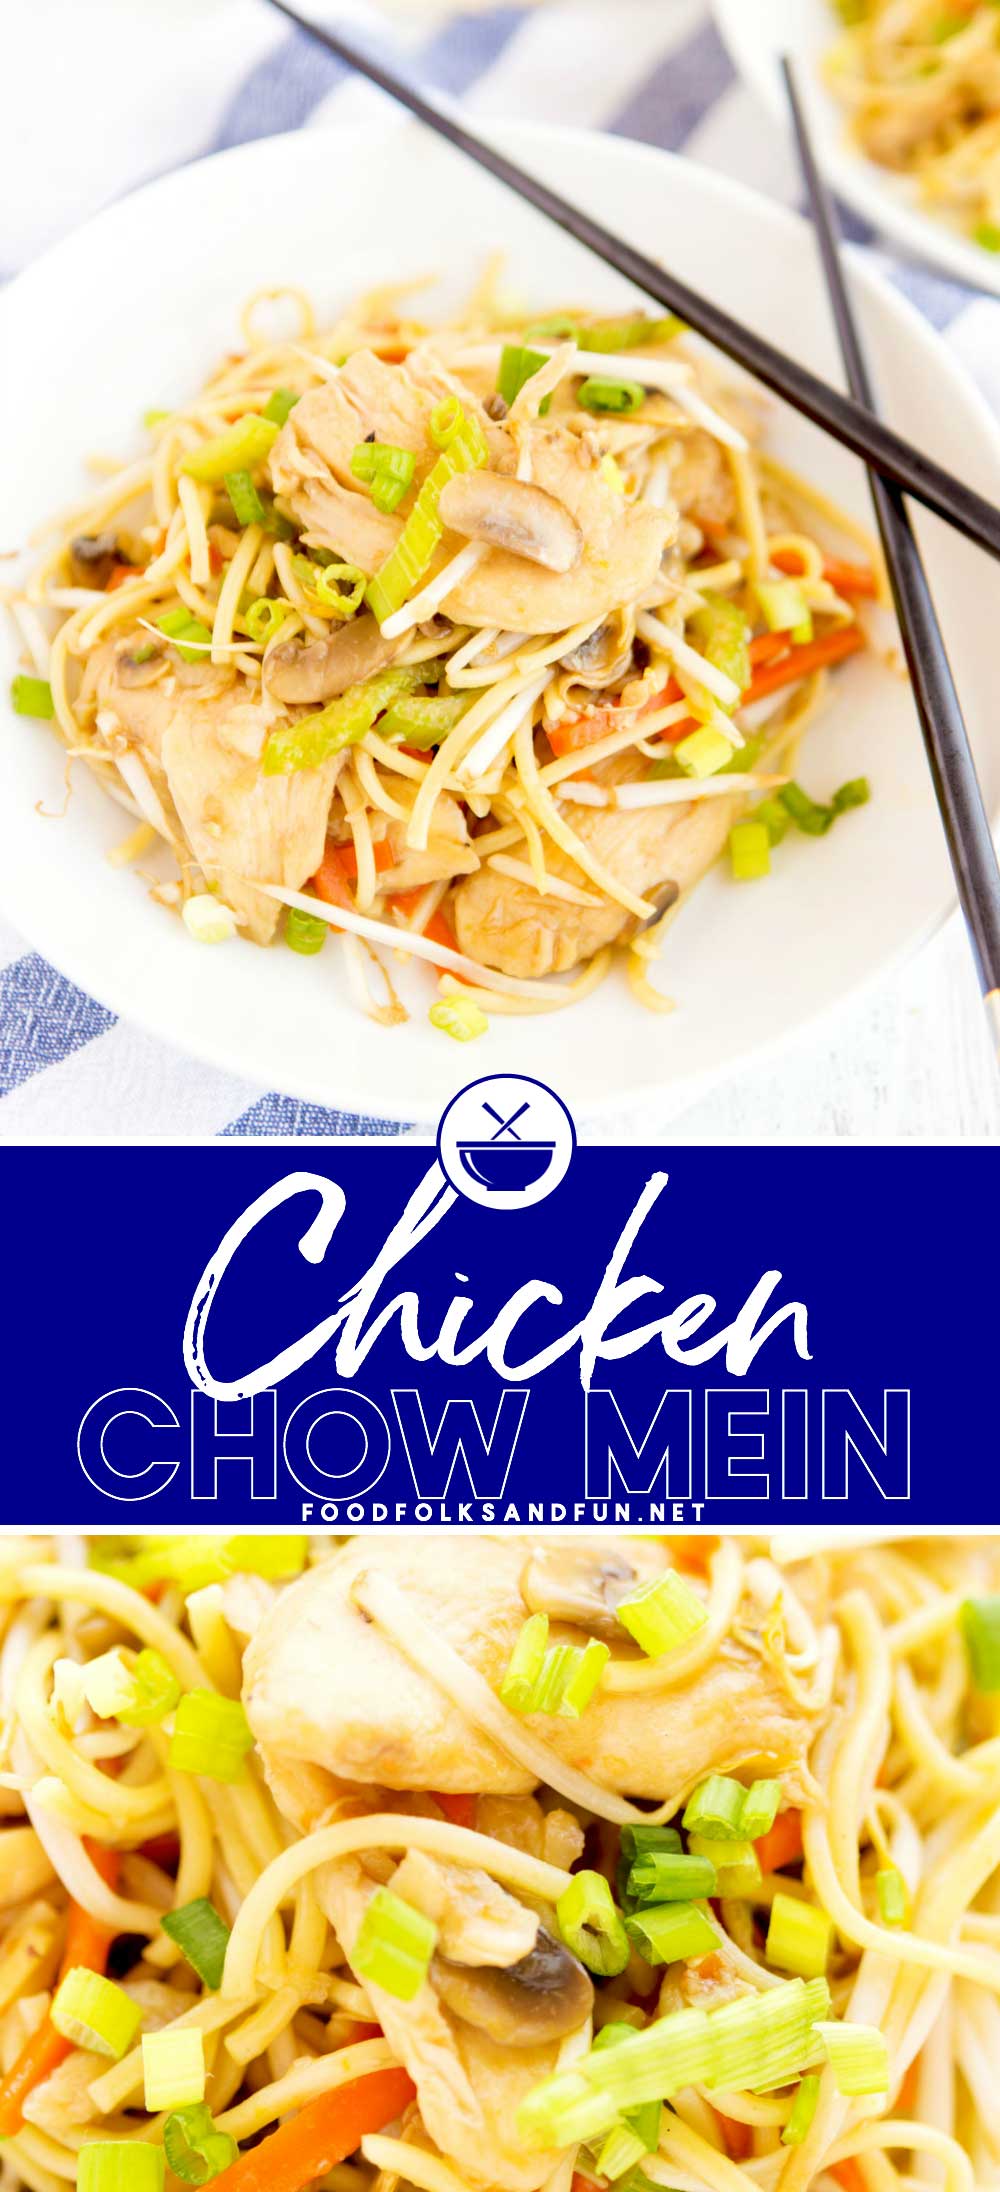 This Chicken Chow Mein is an easy, at-home recipe that's better than any Chinese takeout! It's simple and so crave-worthy! via @foodfolksandfun